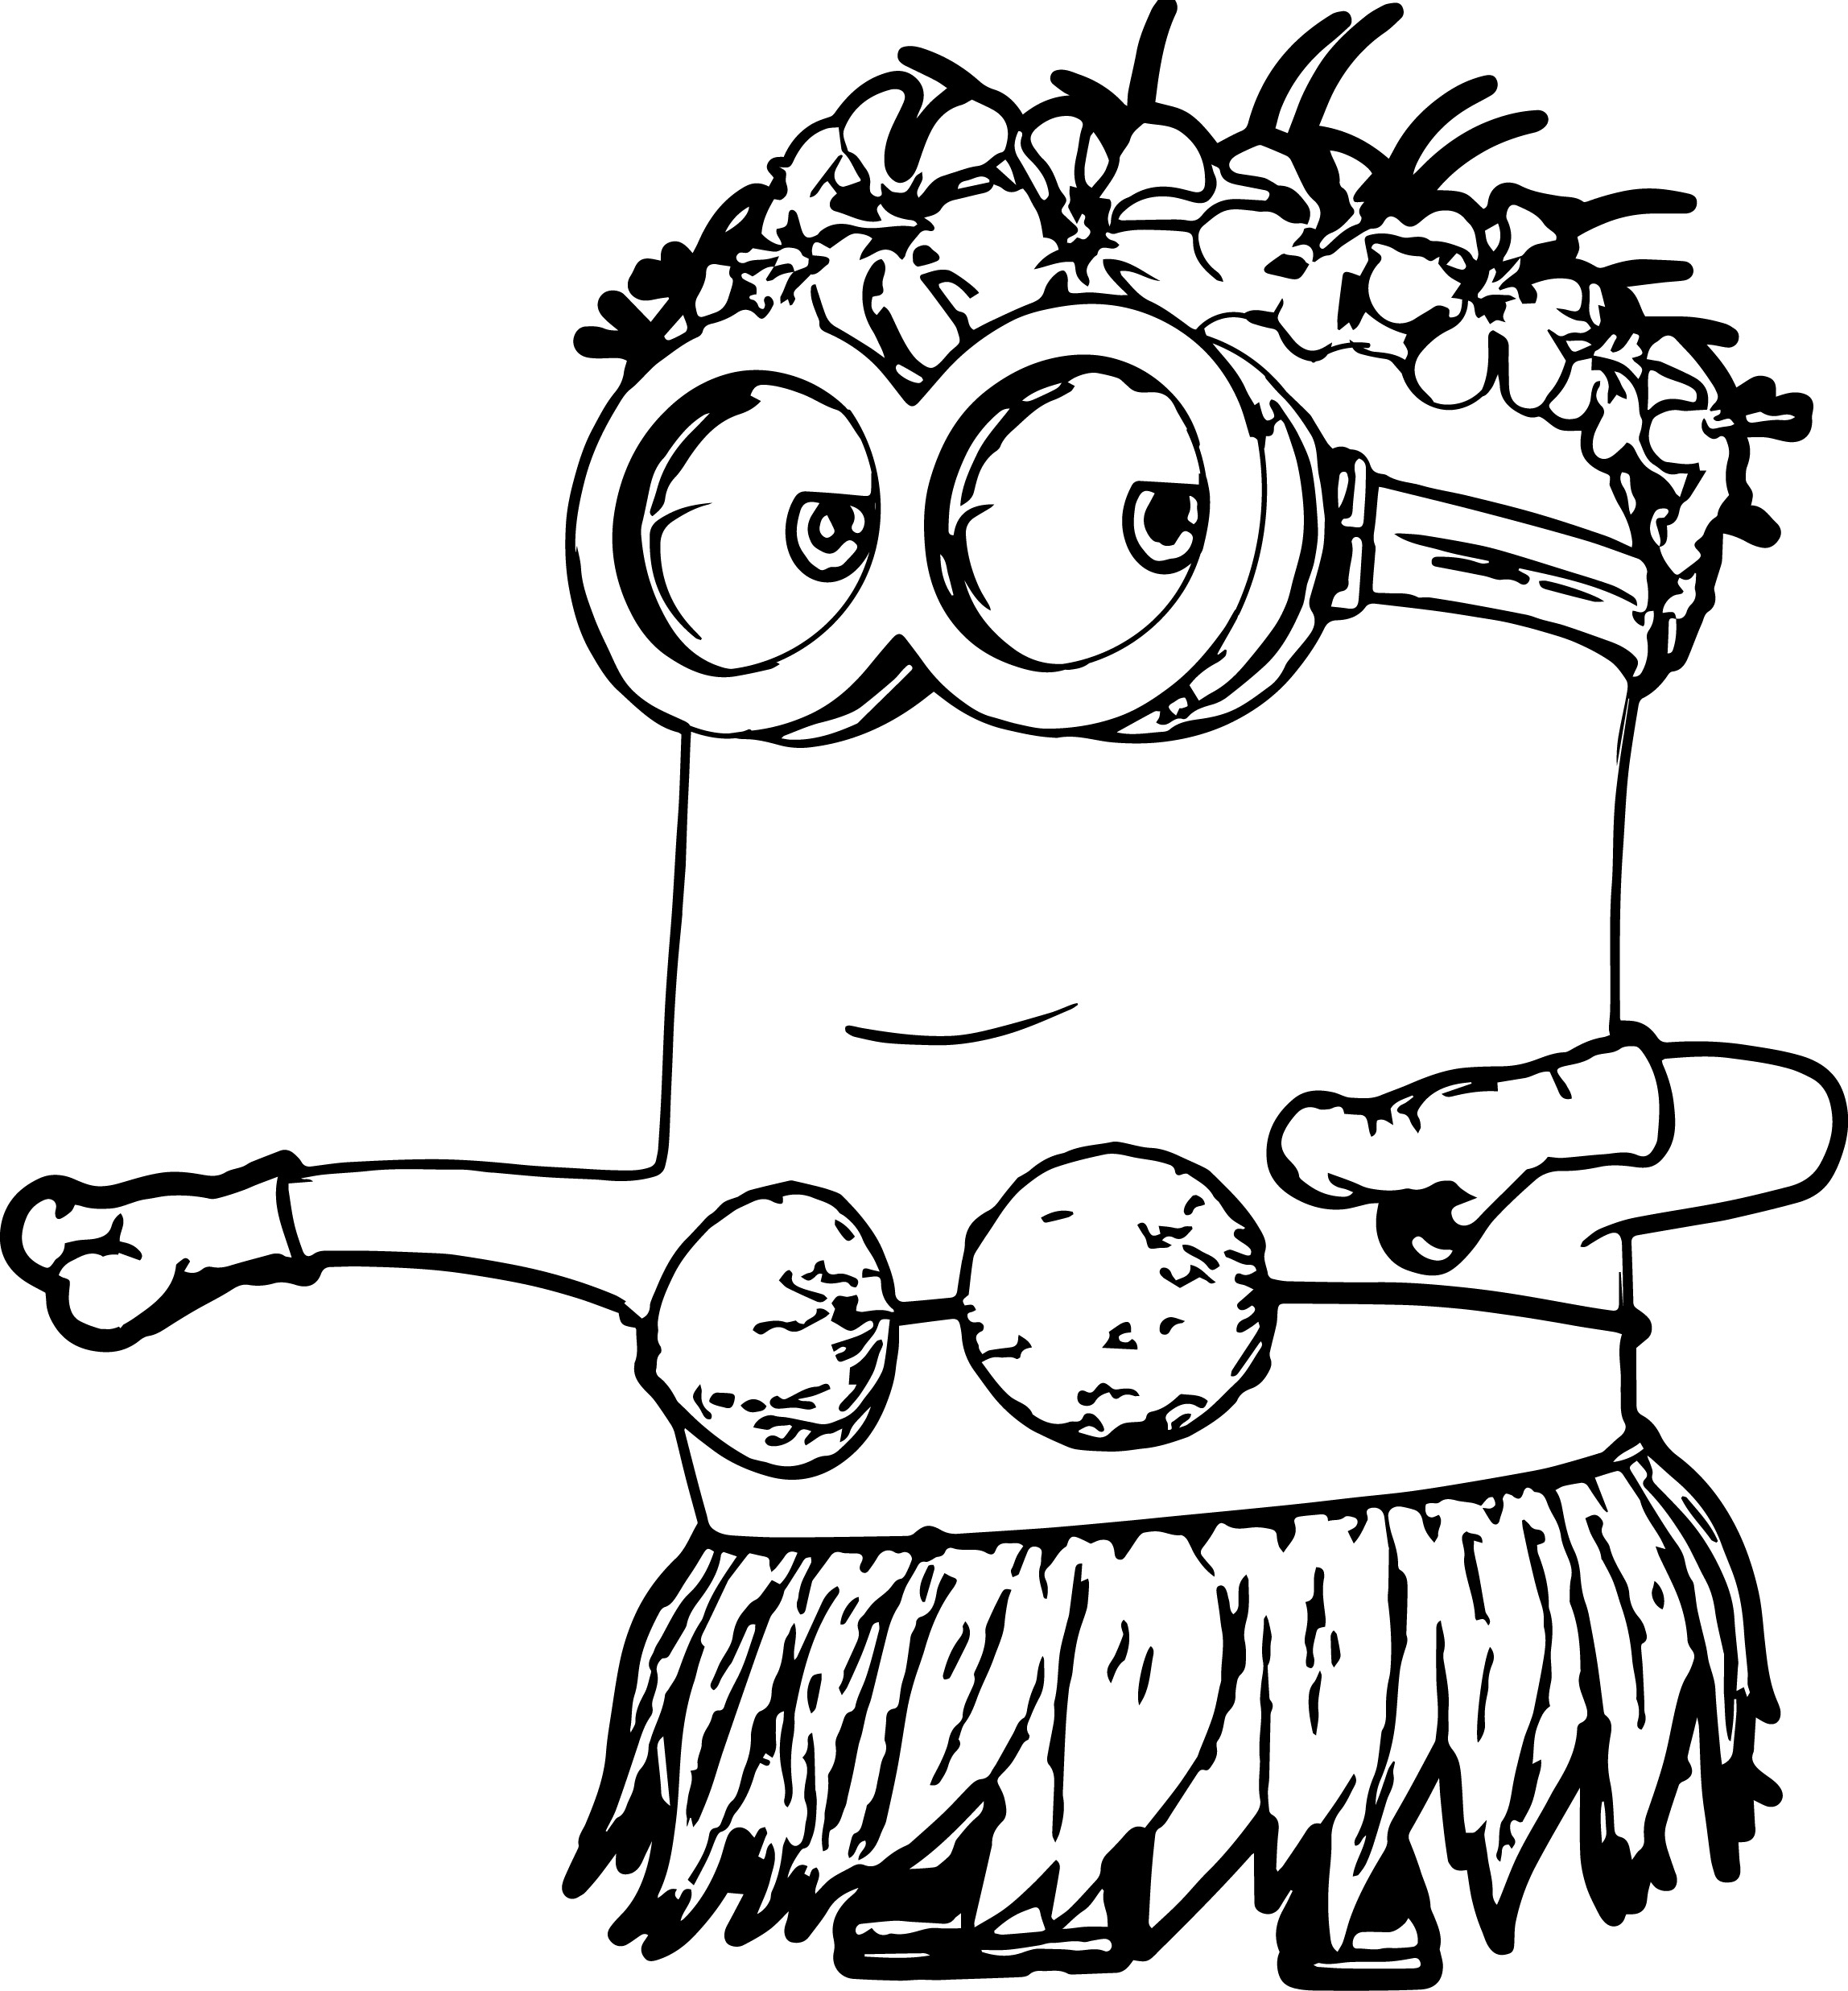 minions coloring minion coloring pages best coloring pages for kids coloring minions 1 6